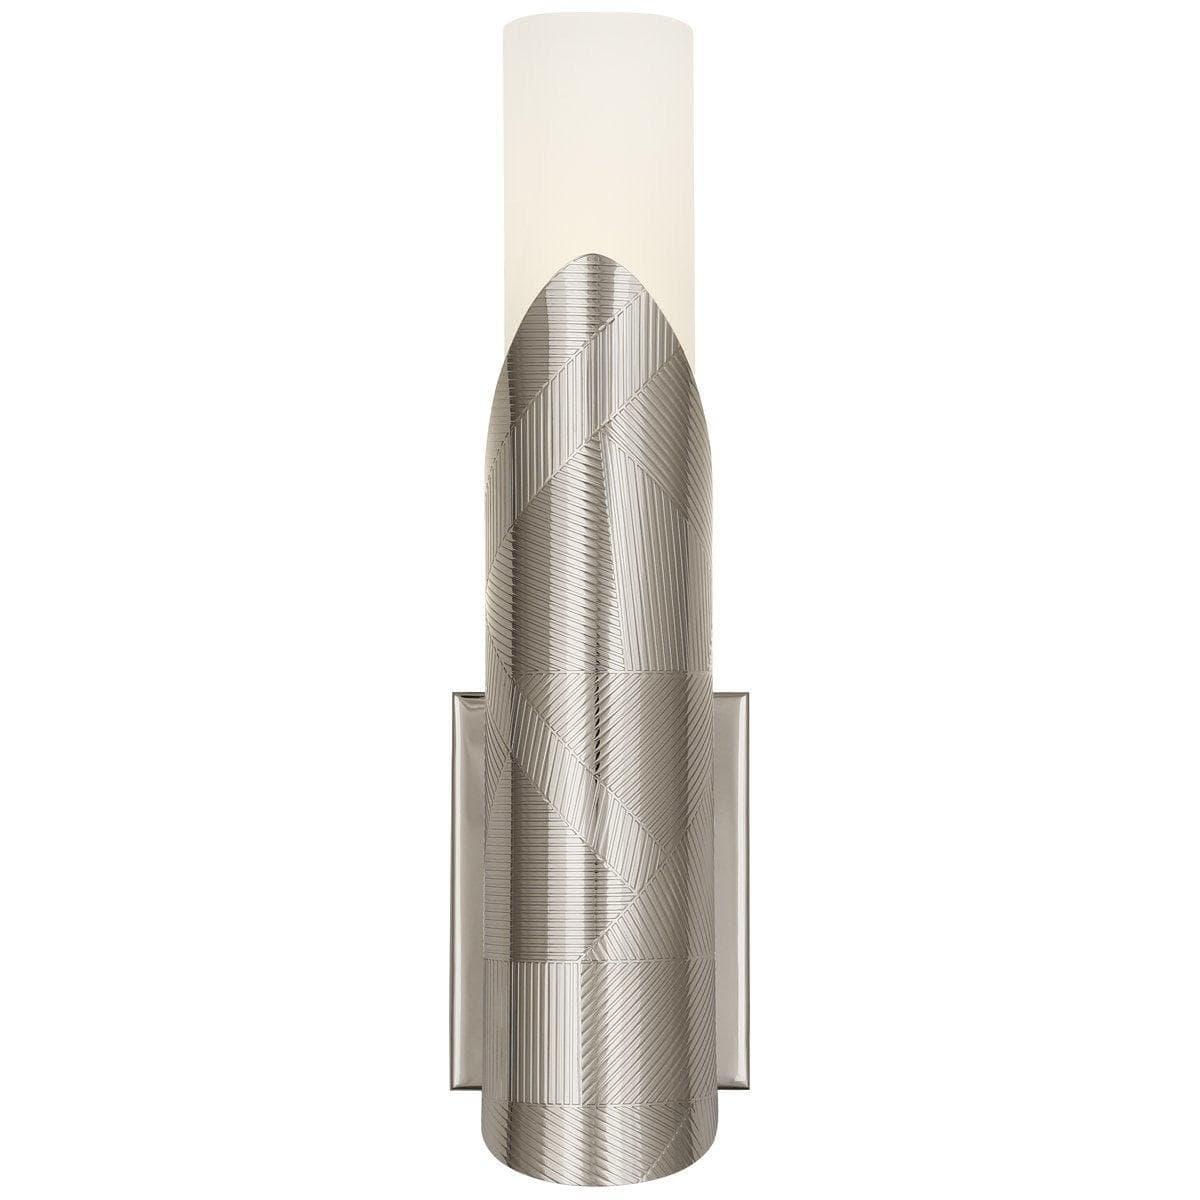 Robert Abbey - Brut Wall Sconce - S620 | Montreal Lighting & Hardware